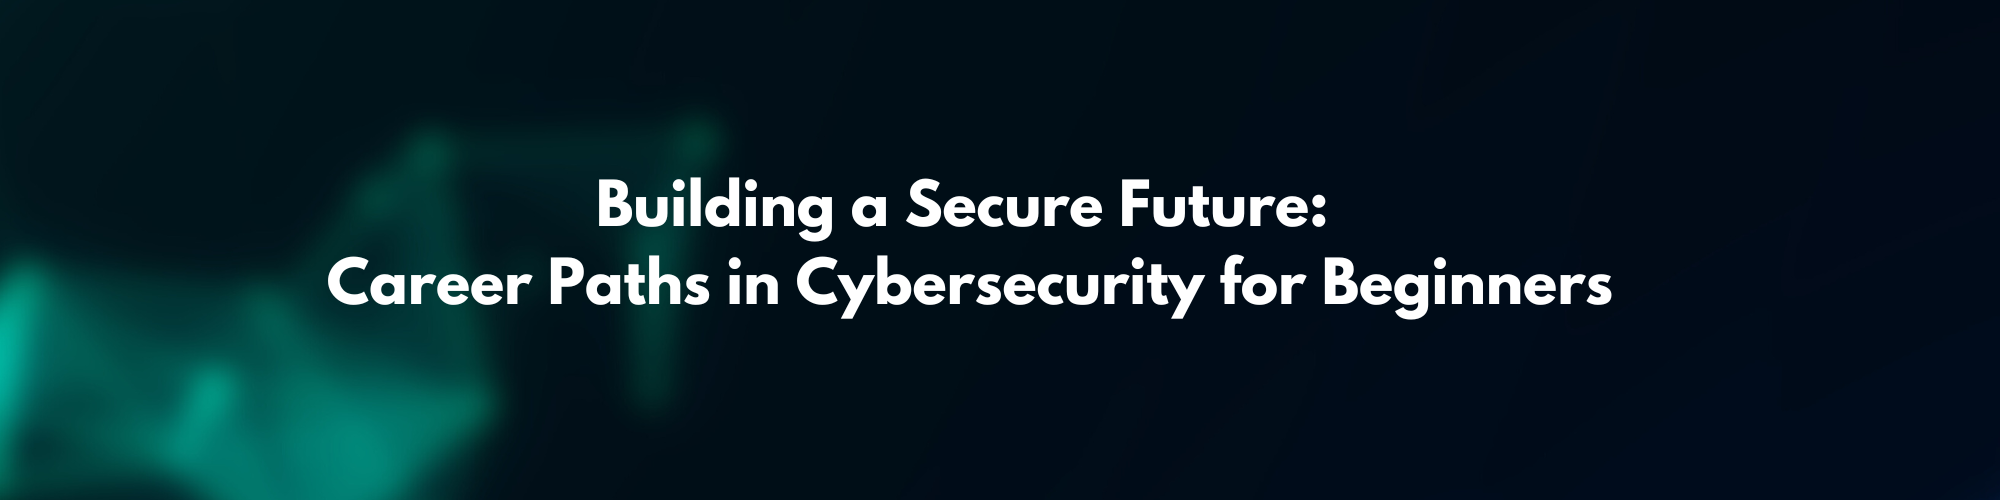 Building a Secure Future: Career Paths in Cybersecurity for Beginners